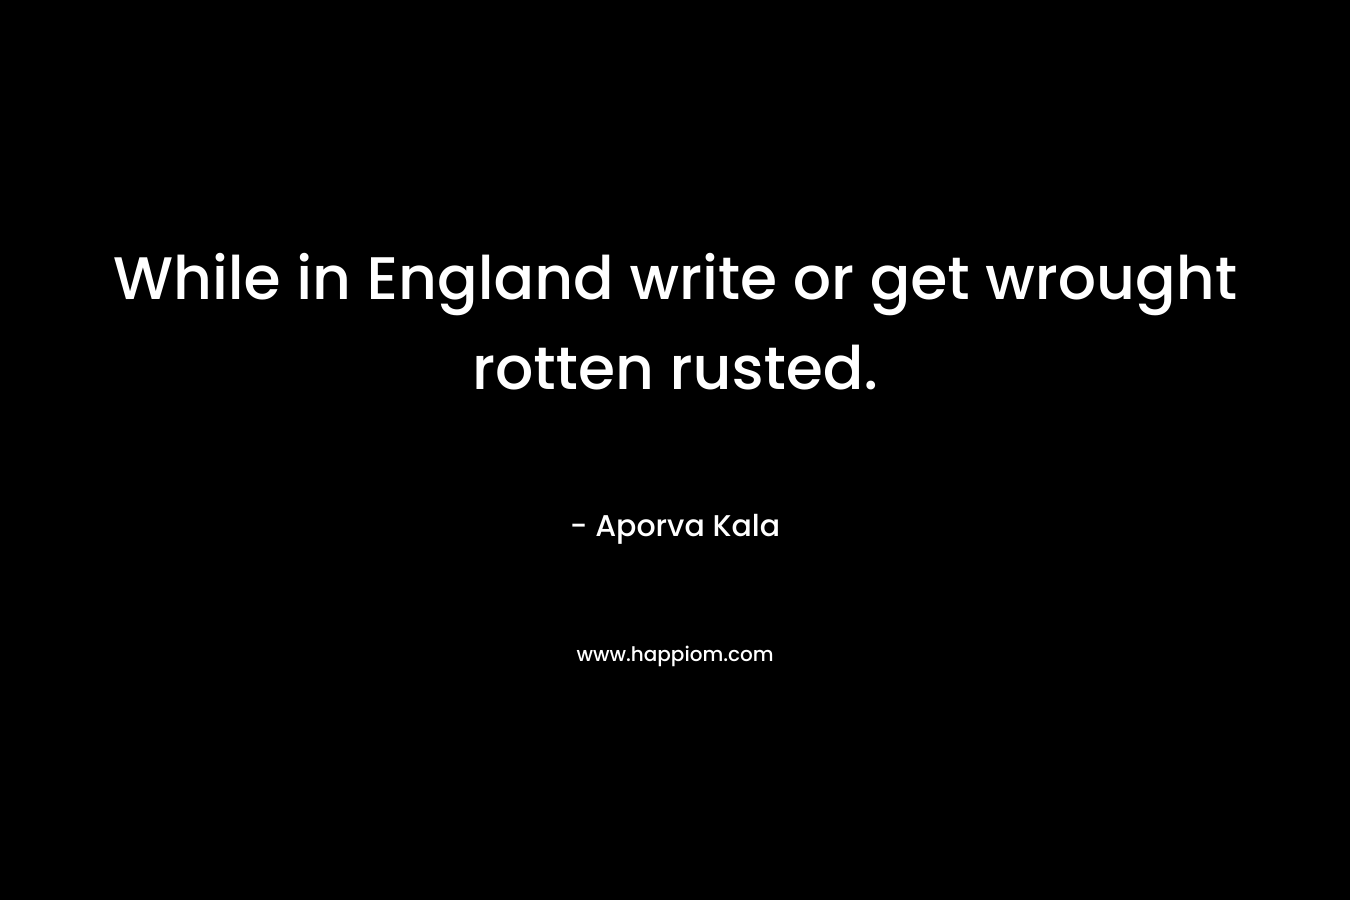 While in England write or get wrought rotten rusted. – Aporva Kala